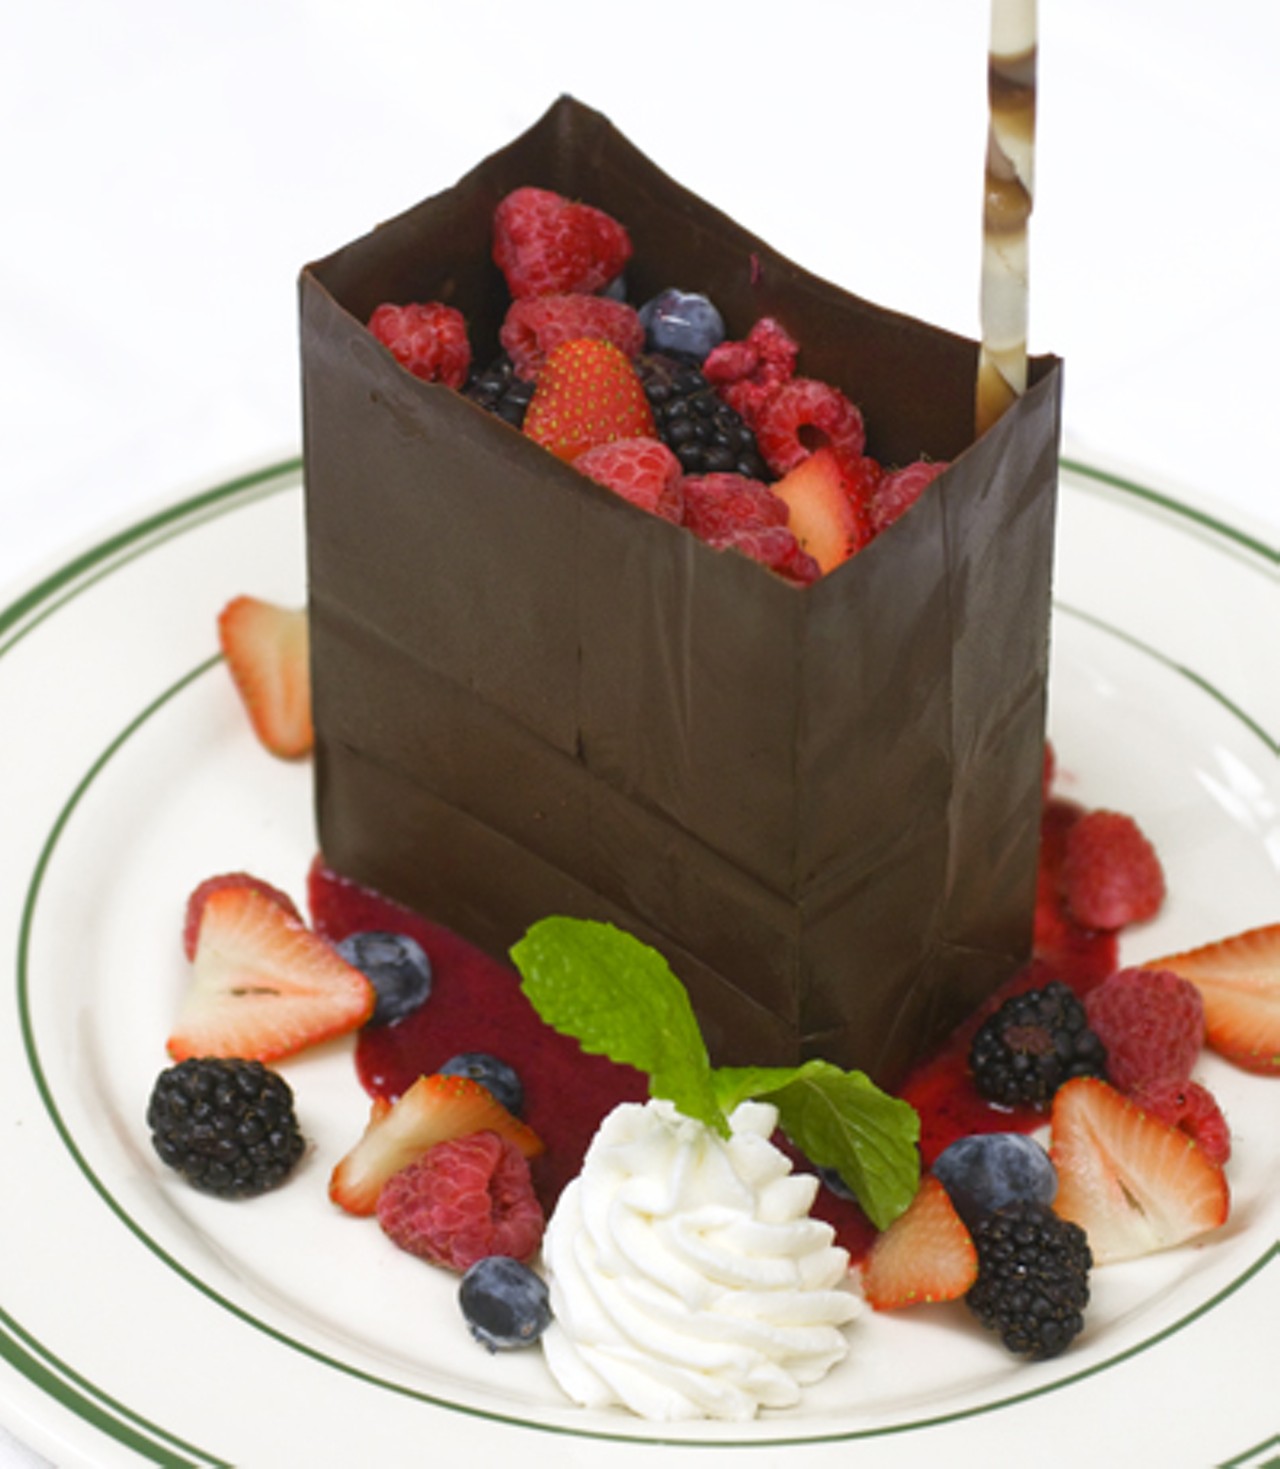 The chocolate bag served with mixed berries and white chocolate mousse.